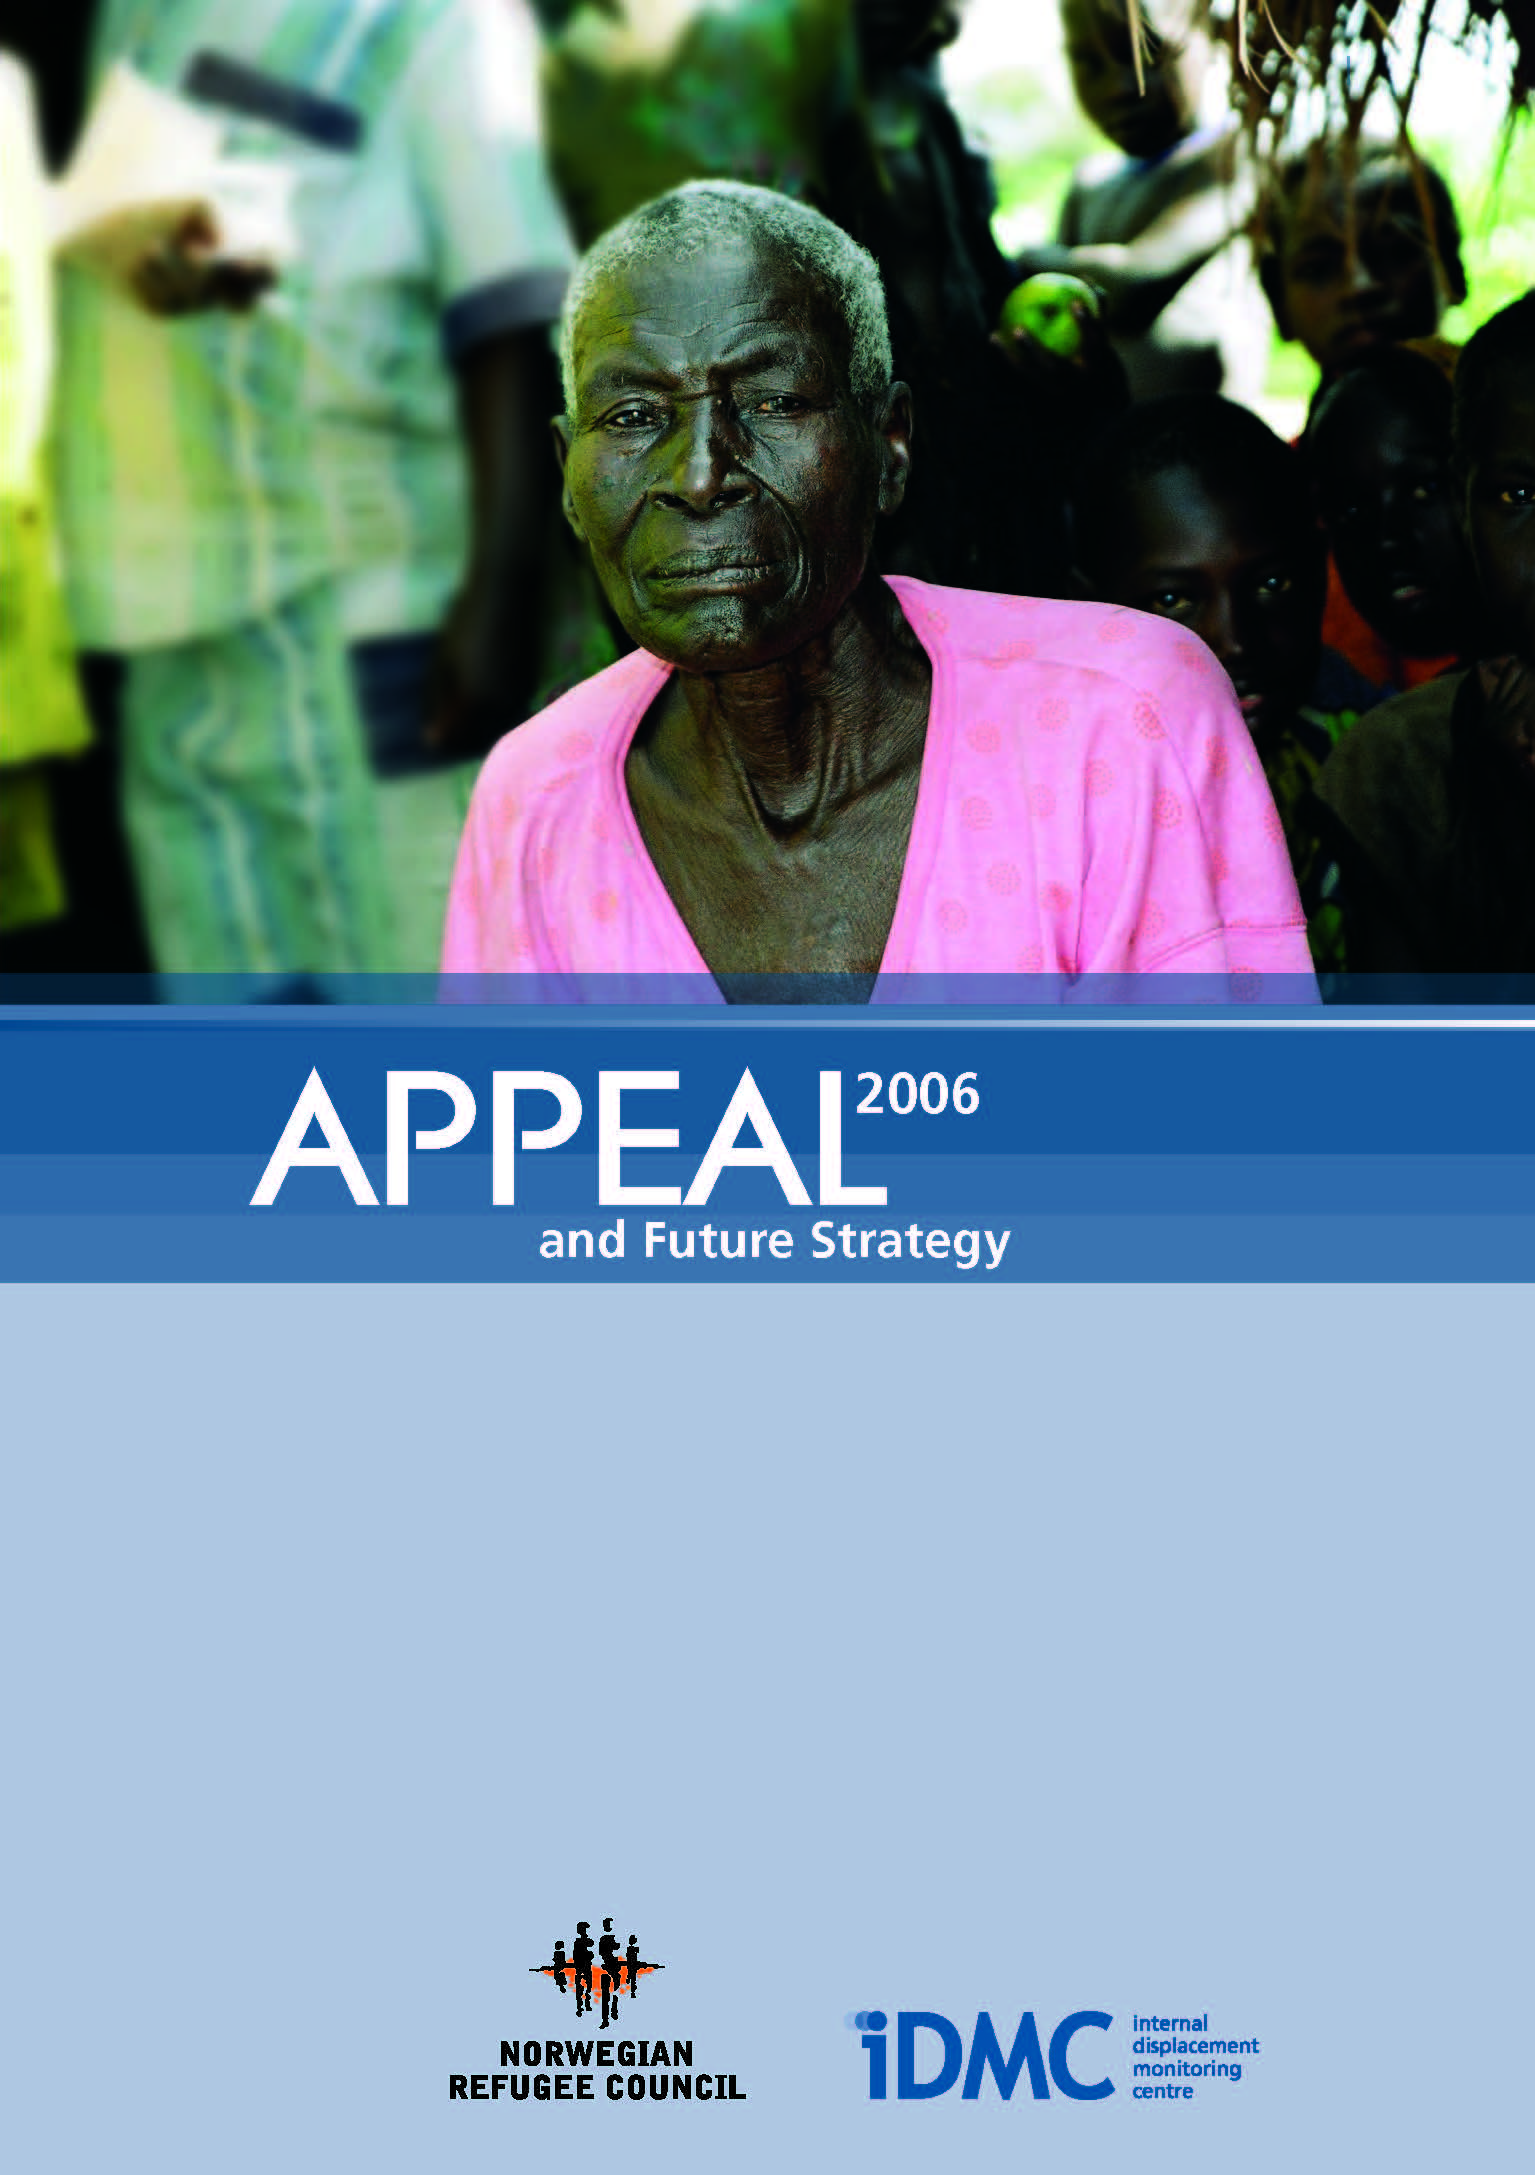 Appeal 2006 and Future Strategy